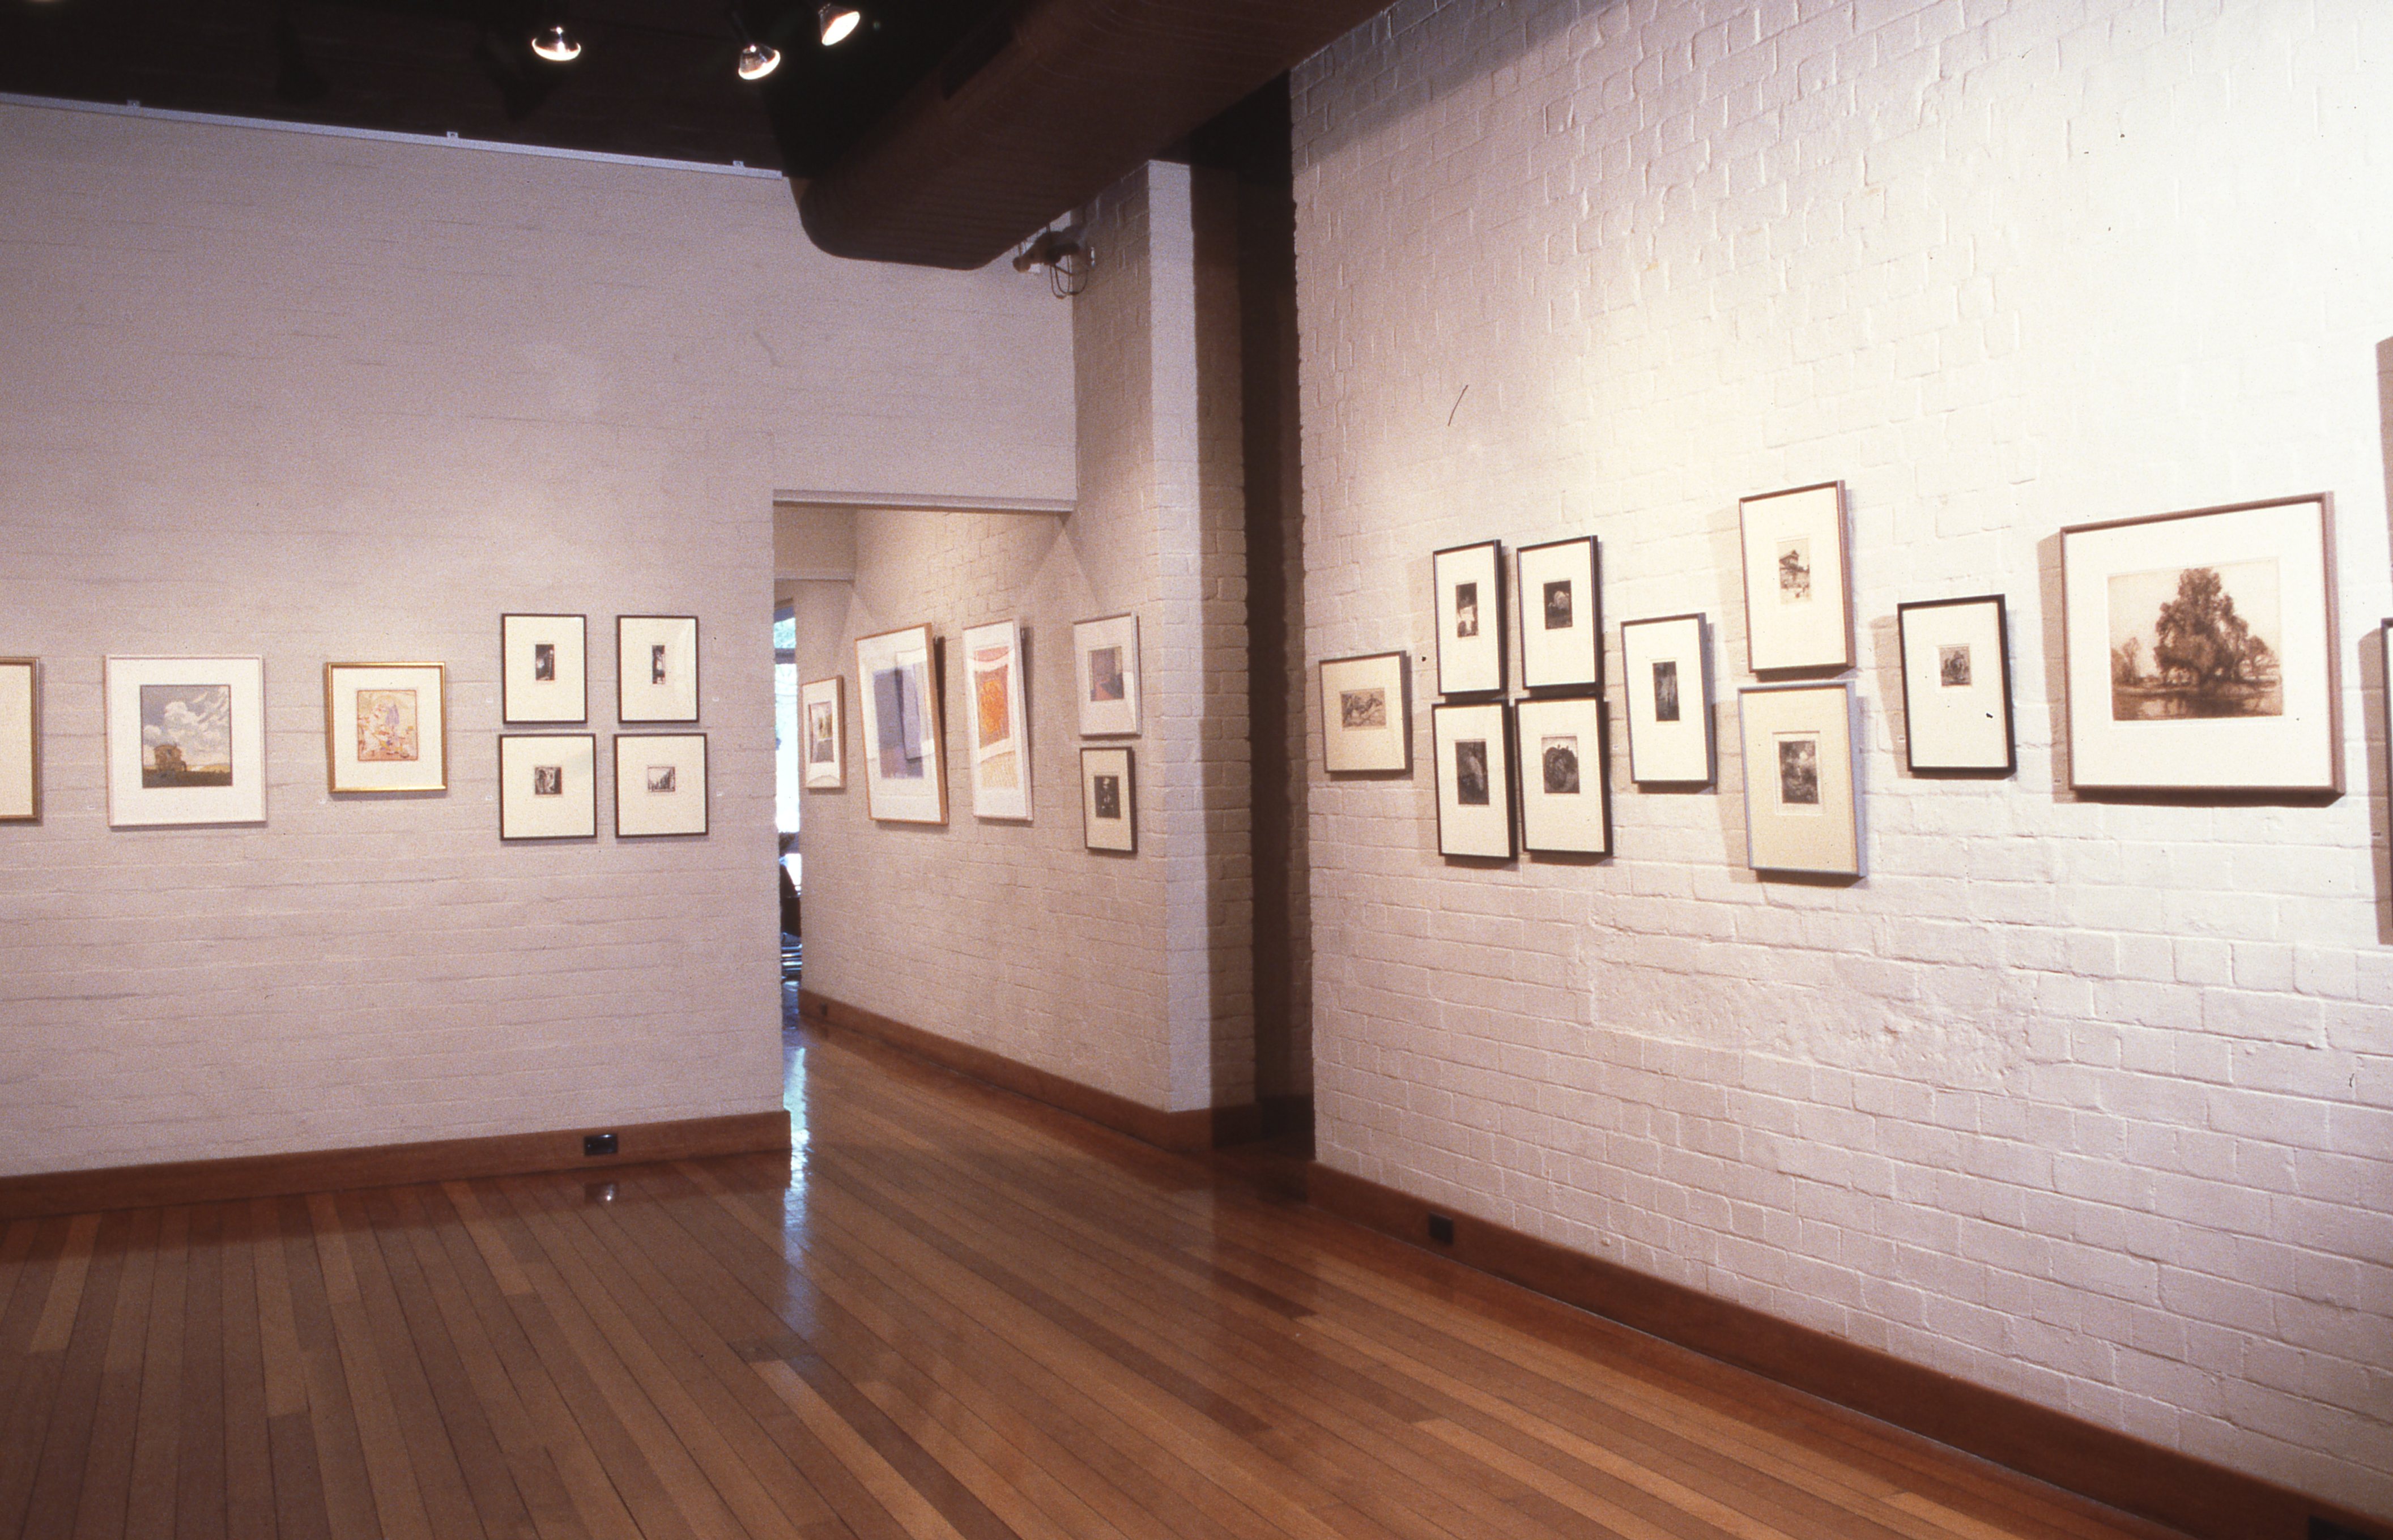 idg_archive_1987_prints_and_printmakers_aspects_of_a_college_collection_006_install.jpg